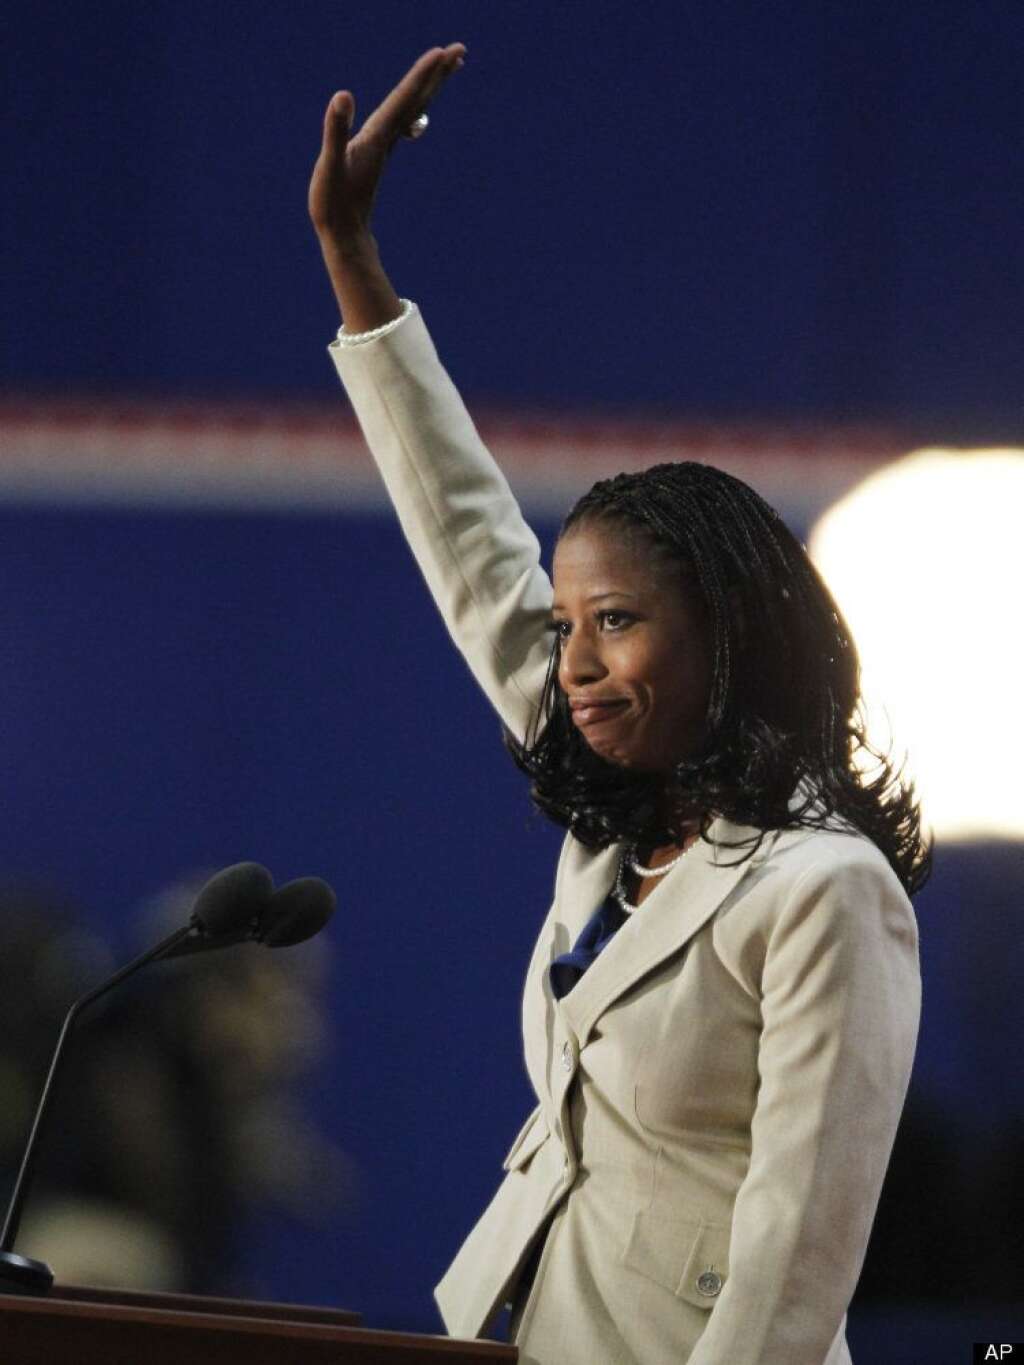 Mia Love - Mayor of Saratoga Springs, Utah, Mia Love waves to candidates following her speech during the Republican National Convention in Tampa, Fla., on Tuesday, Aug. 28, 2012. (AP Photo/Lynne Sladky)